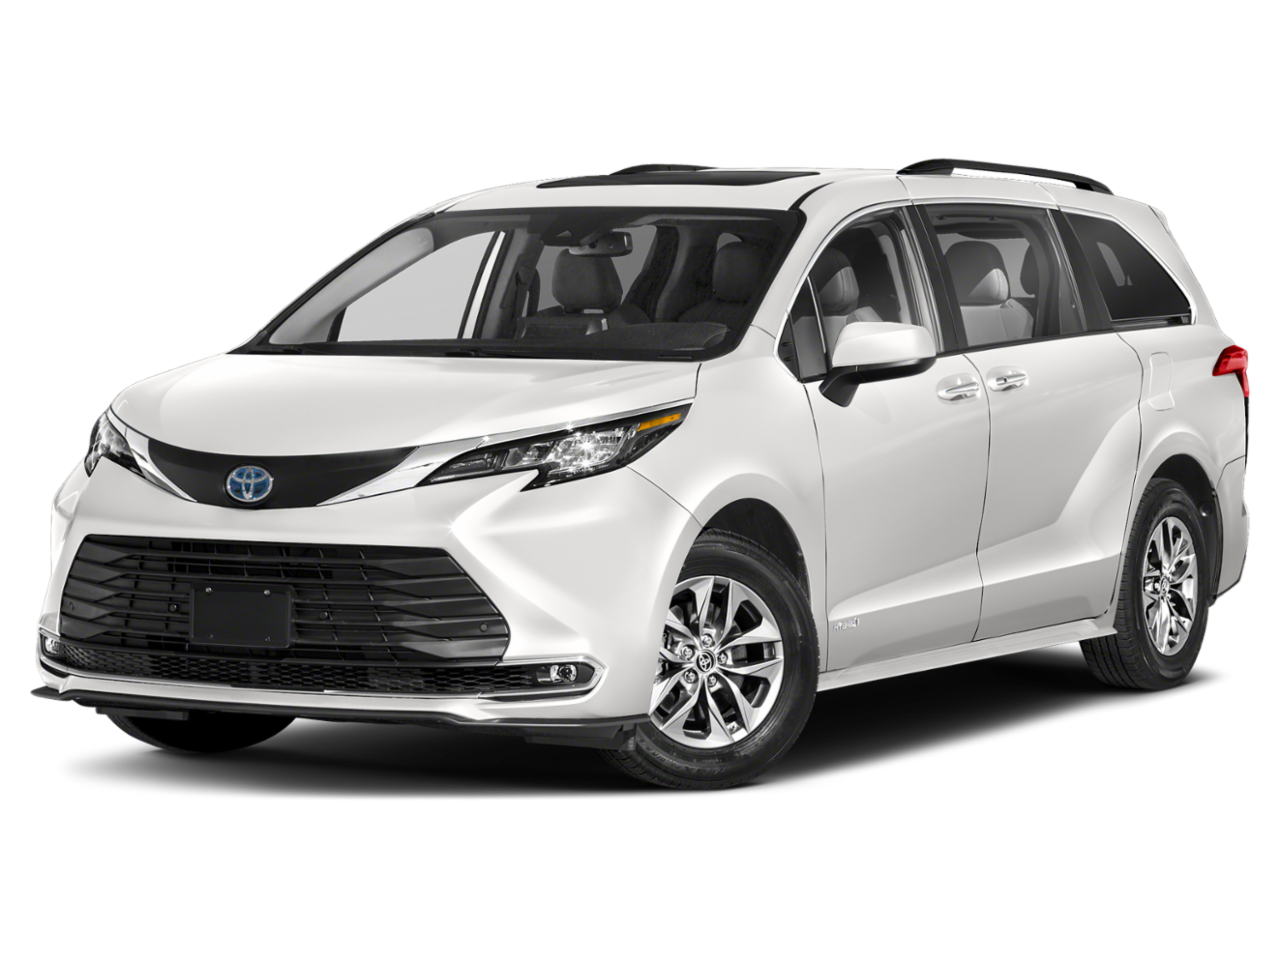 Toyota Sienna Repair: Service and Maintenance Cost